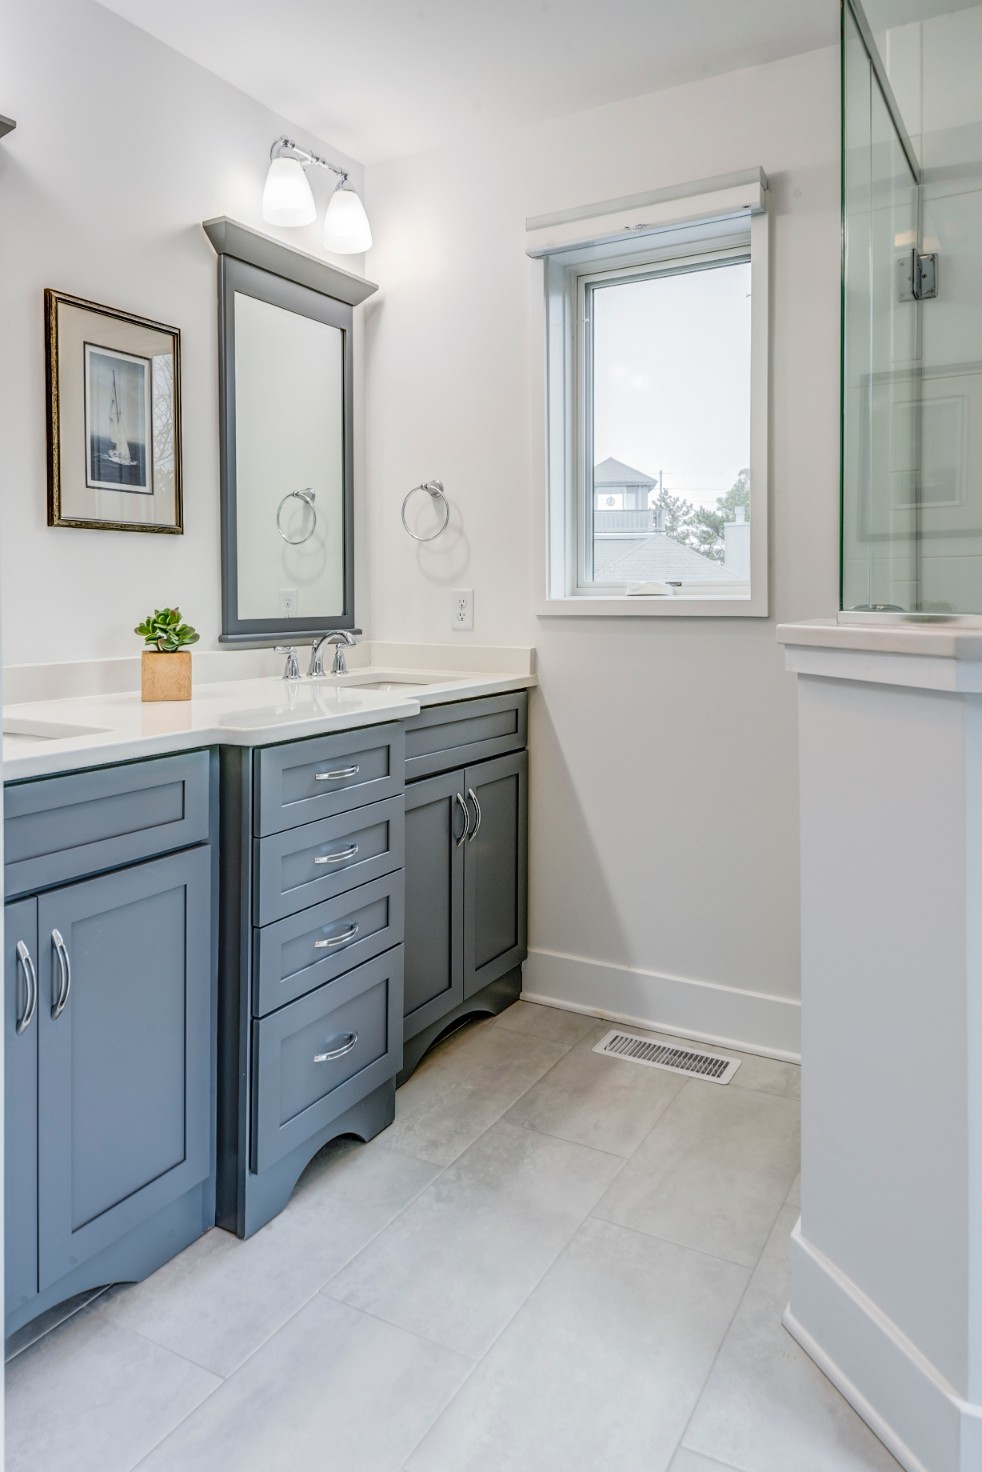 Cotton Patch Hills Bathroom Remodel in Bethany Beach DE with Shaker Cabinets and Rectangular Mirror